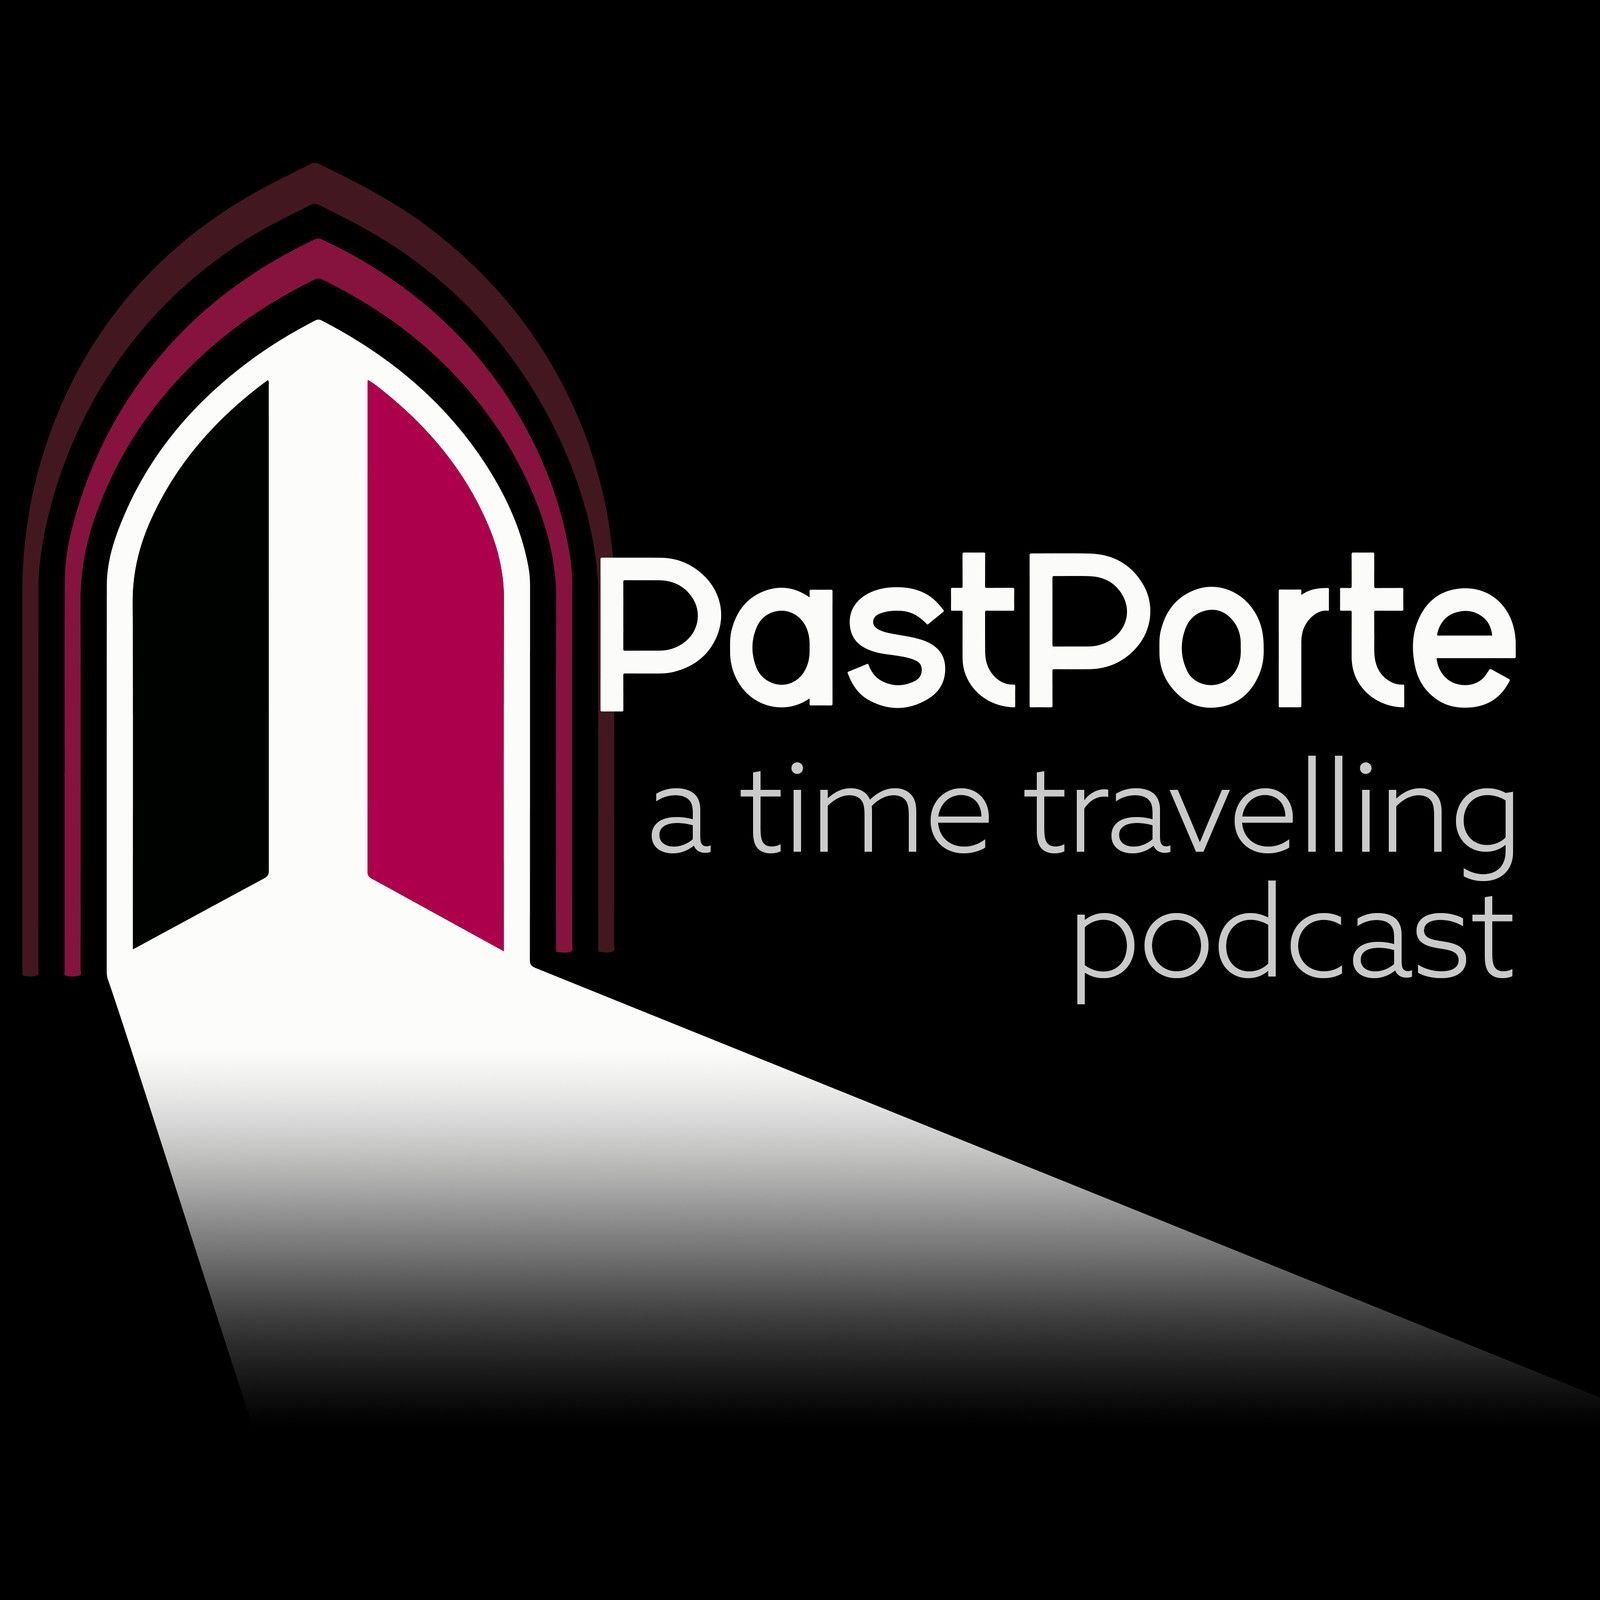 PastPorte: A Time Travelling Podcast